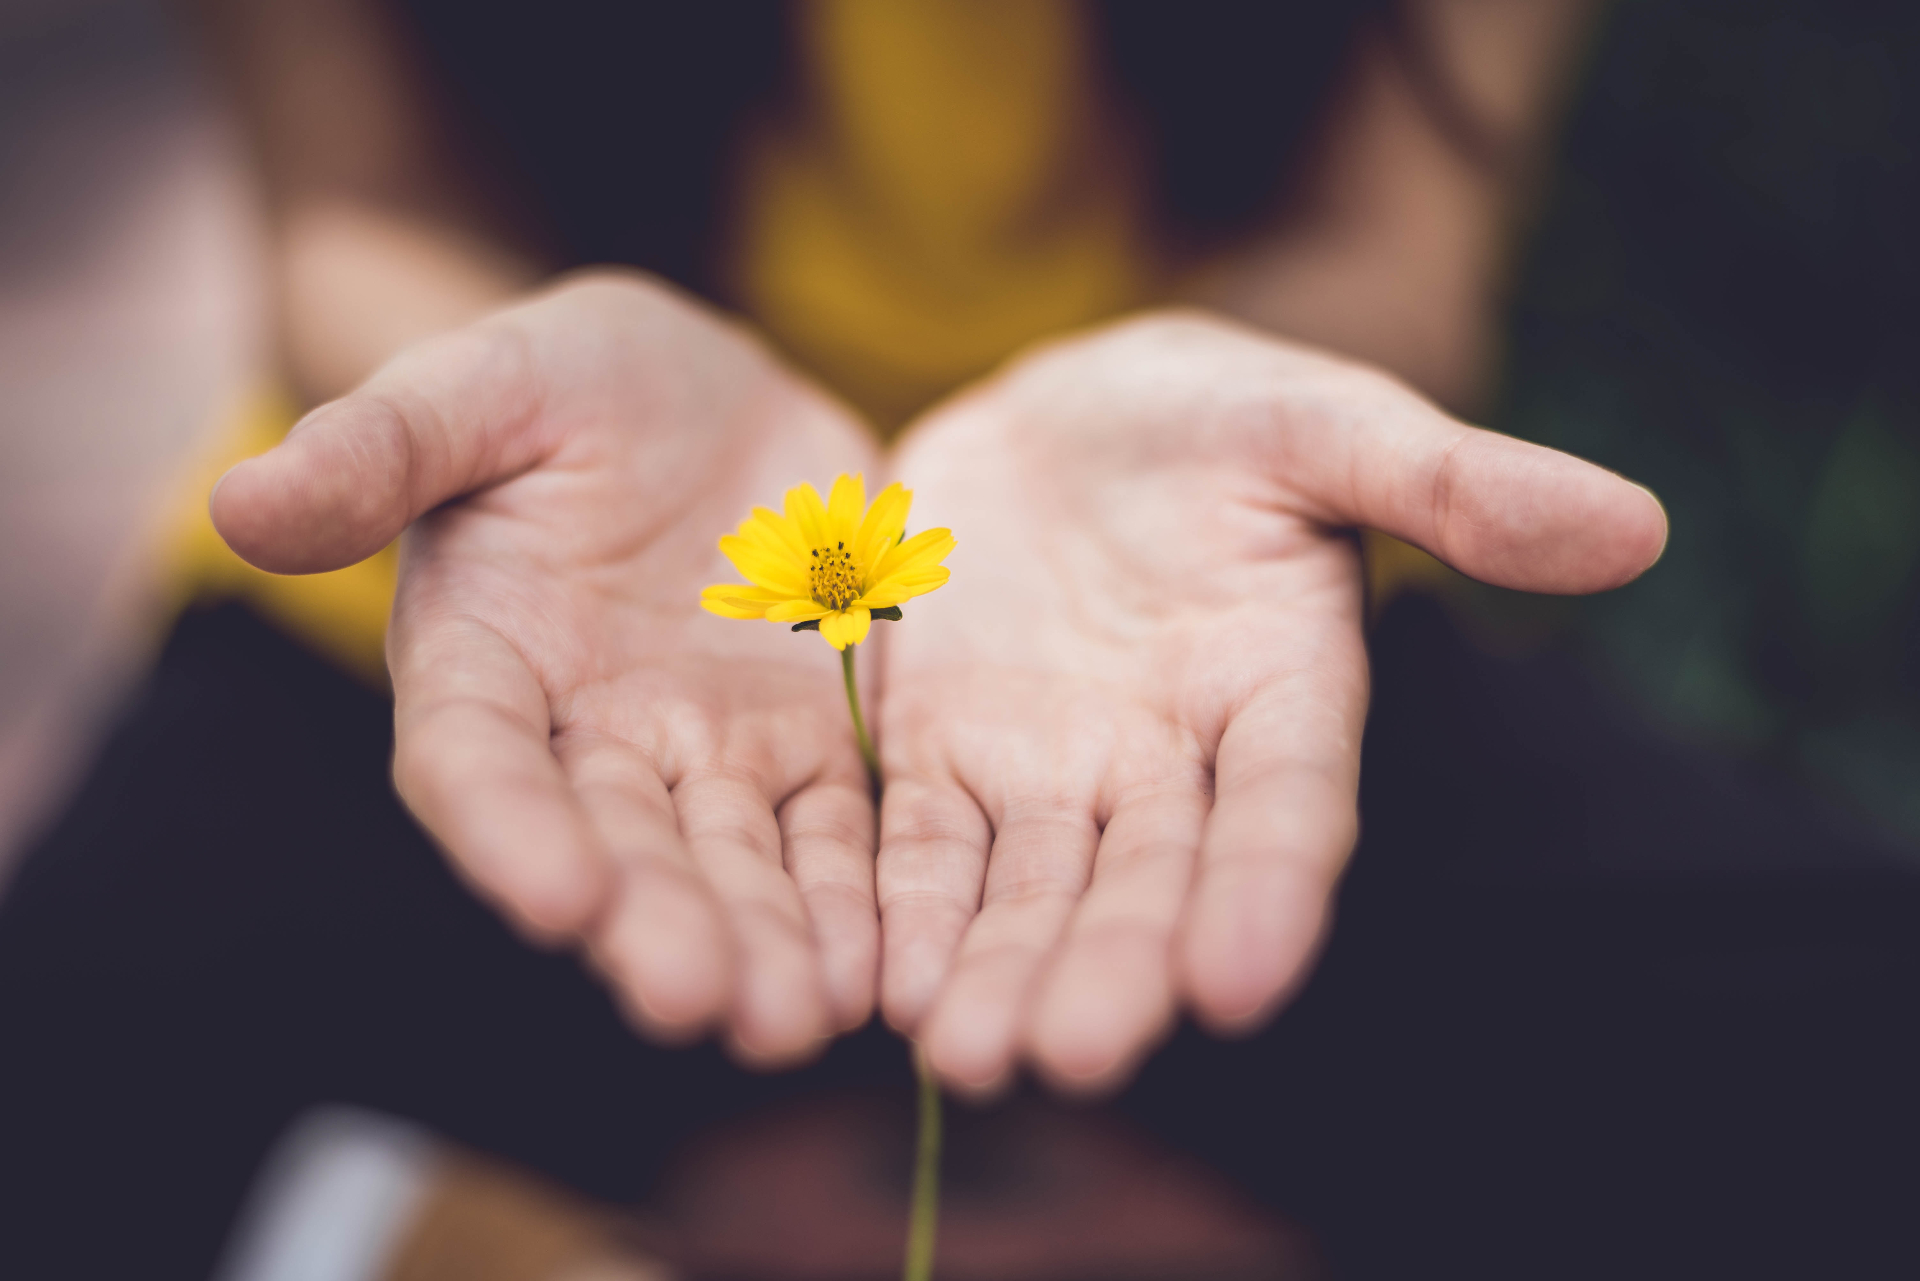 Open hands with one yellow flower in the center